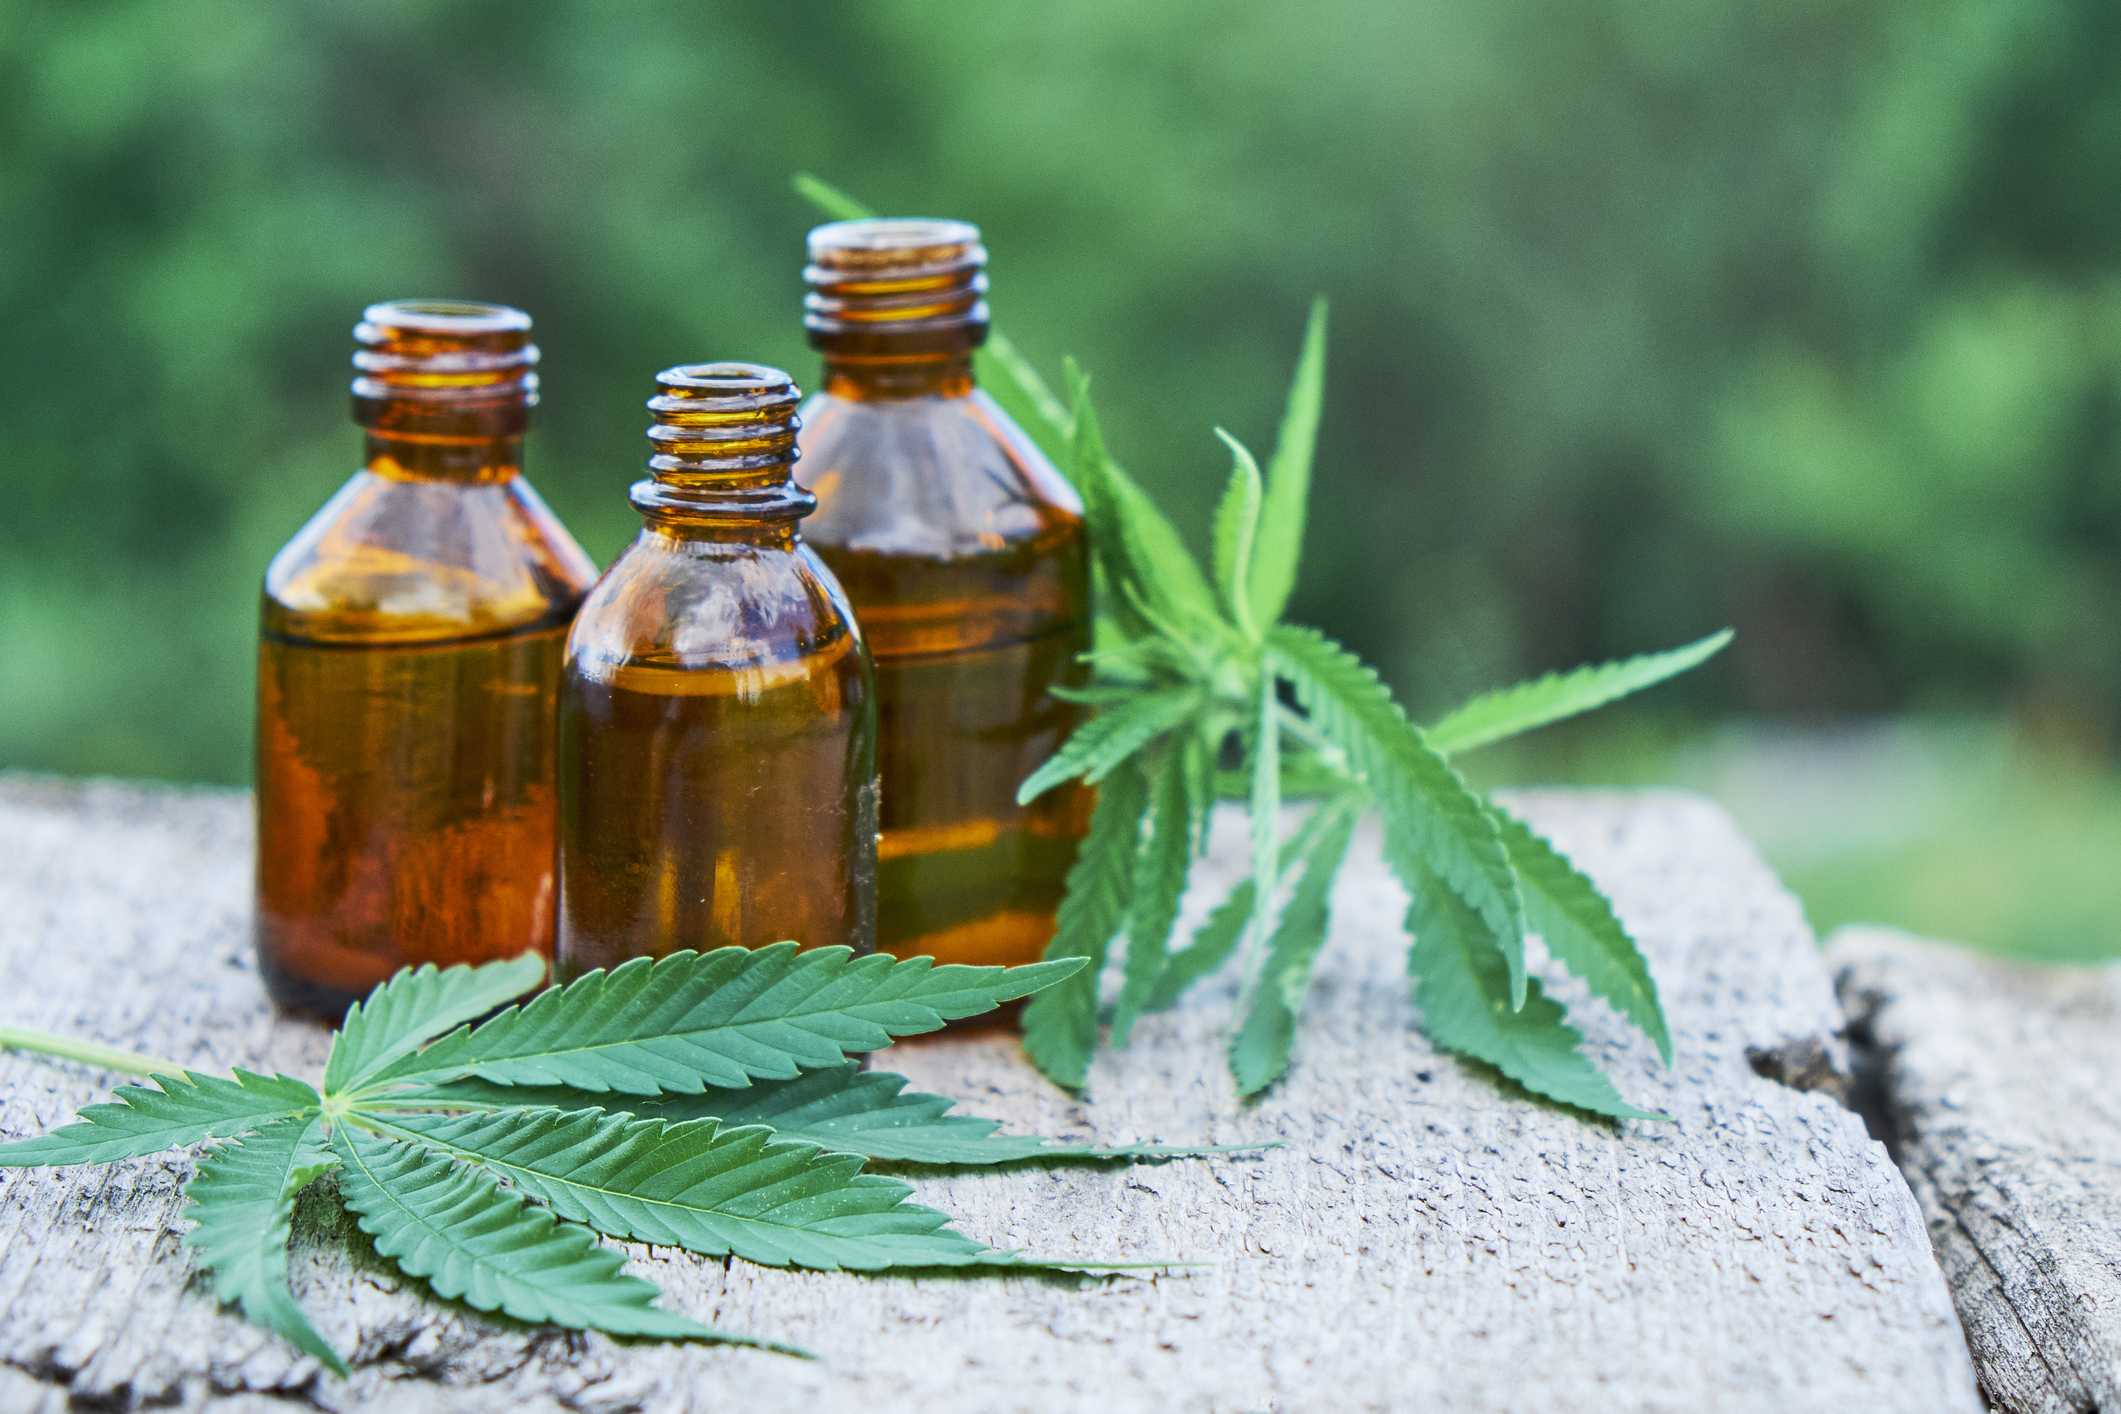 How Do You Measure Thc In Cbd Oil - Cbd|Oil|Cannabidiol|Products|View|Abstract|Effects|Hemp|Cannabis|Product|Thc|Pain|People|Health|Body|Plant|Cannabinoids|Medications|Oils|Drug|Benefits|System|Study|Marijuana|Anxiety|Side|Research|Effect|Liver|Quality|Treatment|Studies|Epilepsy|Symptoms|Gummies|Compounds|Dose|Time|Inflammation|Bottle|Cbd Oil|View Abstract|Side Effects|Cbd Products|Endocannabinoid System|Multiple Sclerosis|Cbd Oils|Cbd Gummies|Cannabis Plant|Hemp Oil|Cbd Product|Hemp Plant|United States|Cytochrome P450|Many People|Chronic Pain|Nuleaf Naturals|Royal Cbd|Full-Spectrum Cbd Oil|Drug Administration|Cbd Oil Products|Medical Marijuana|Drug Test|Heavy Metals|Clinical Trial|Clinical Trials|Cbd Oil Side|Rating Highlights|Wide Variety|Animal Studies